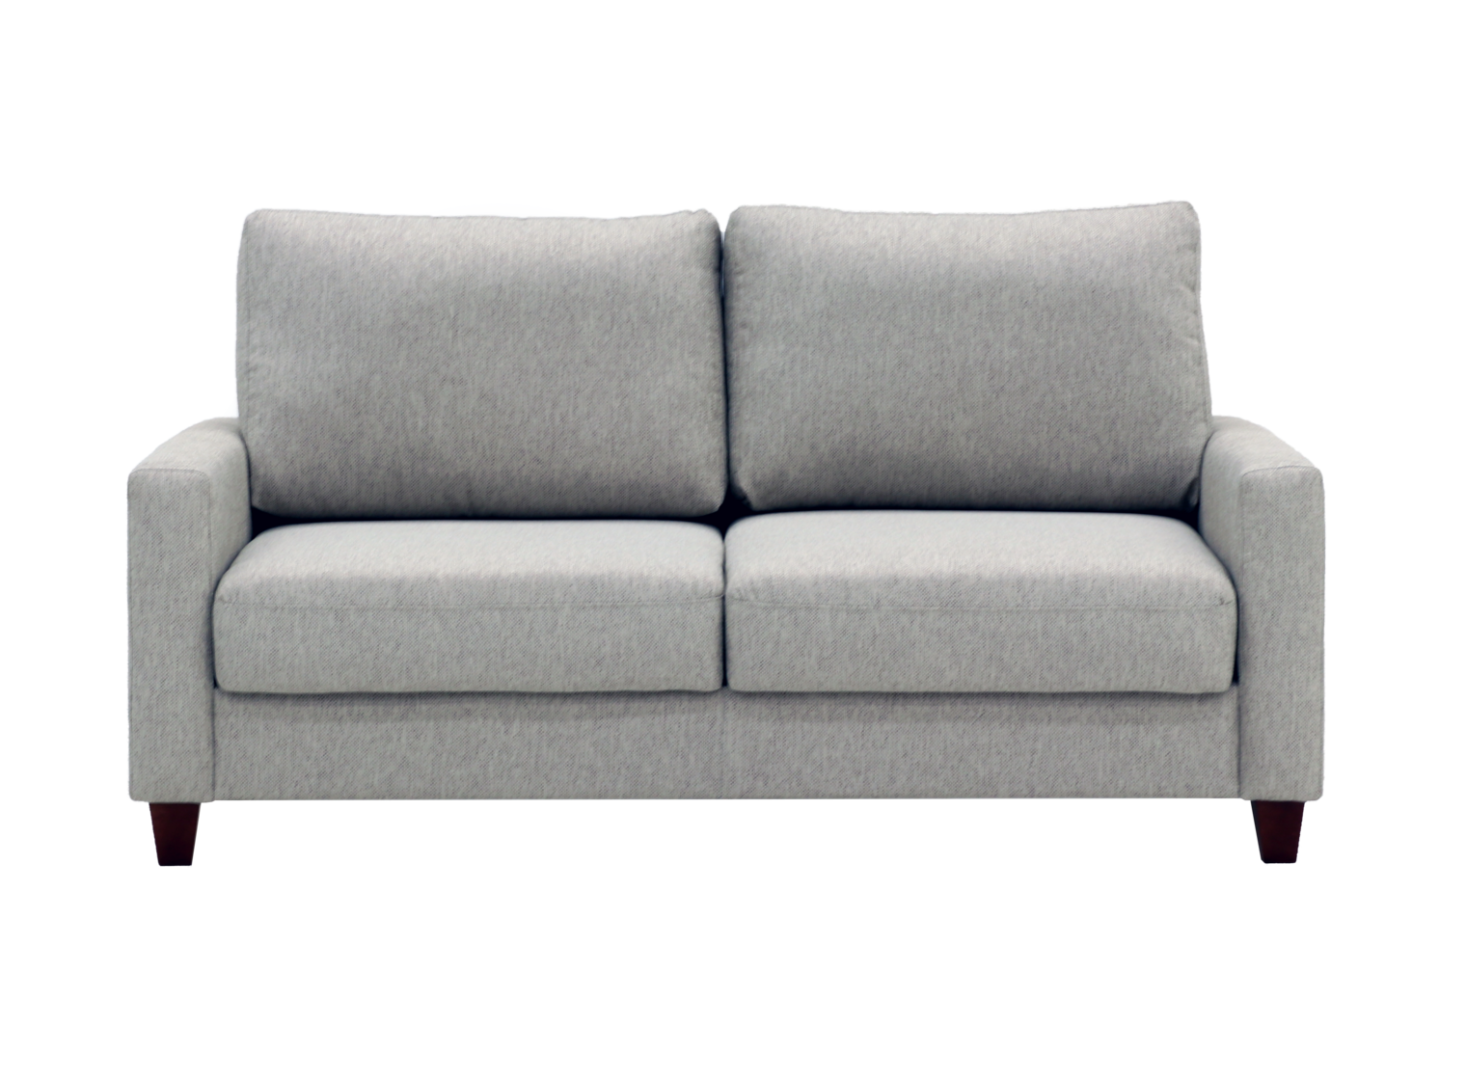 Nico Sofa Sleeper The Century House, What Is The Length Of A Queen Sofa Sleeper